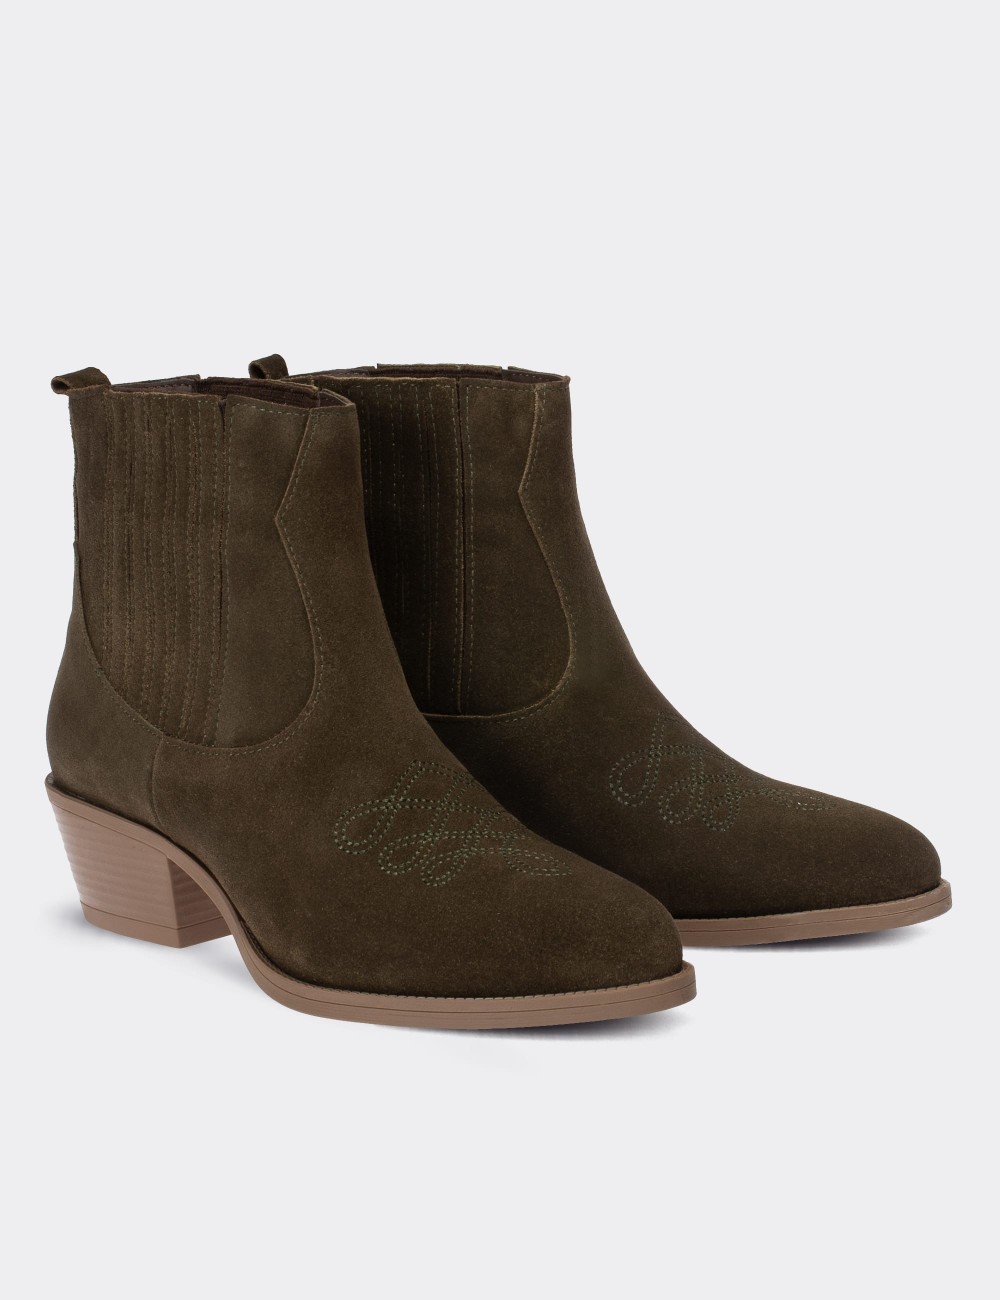 Green Suede Leather Boots - E8100ZHAKC01